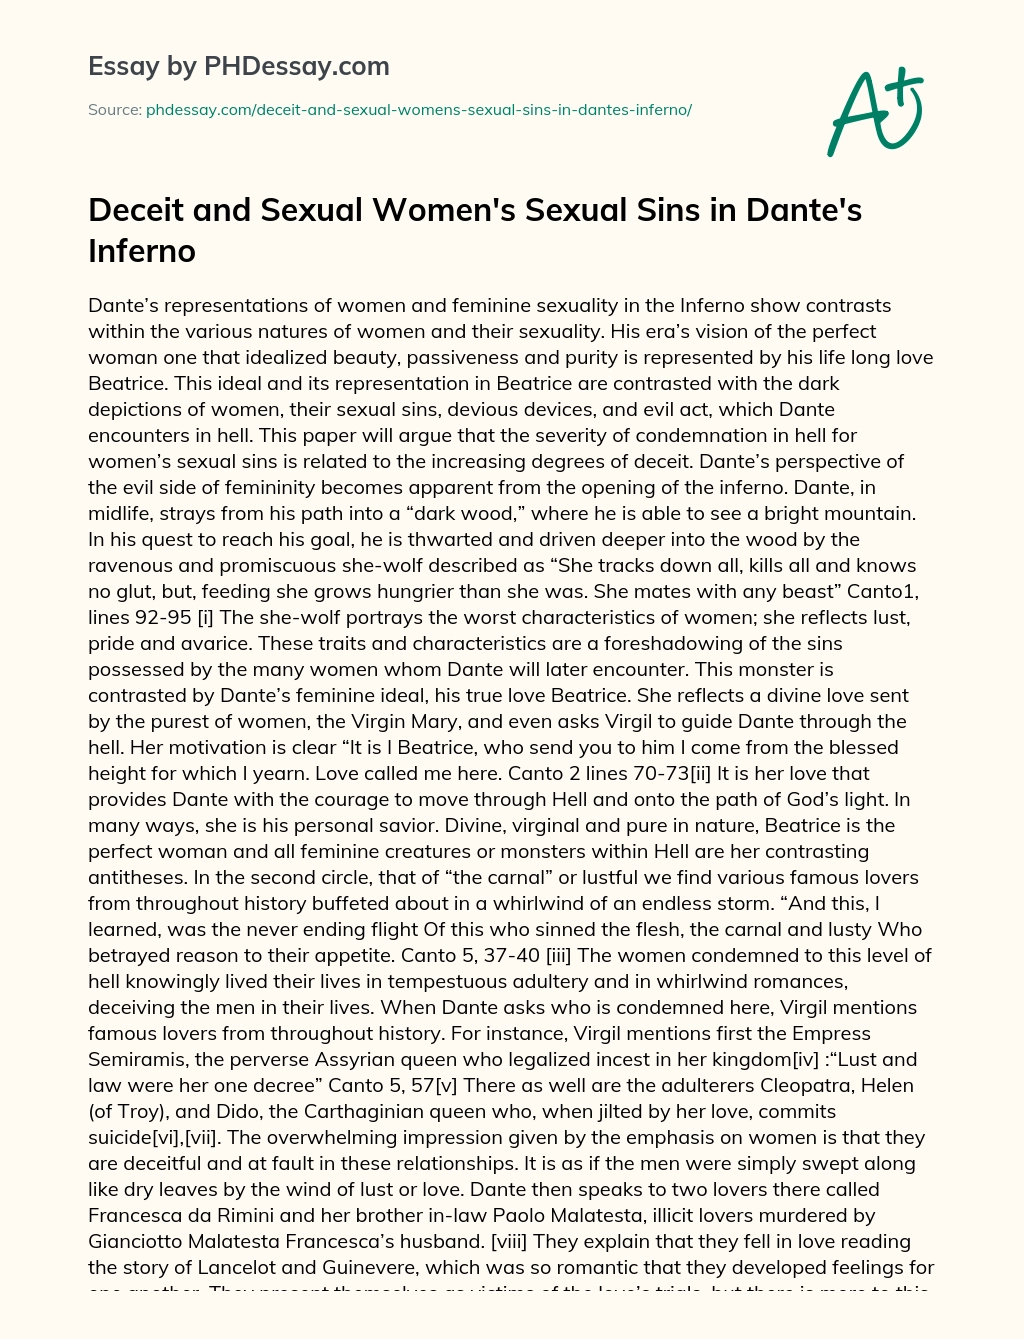 Deceit and Sexual Women’s Sexual Sins in Dante’s Inferno essay